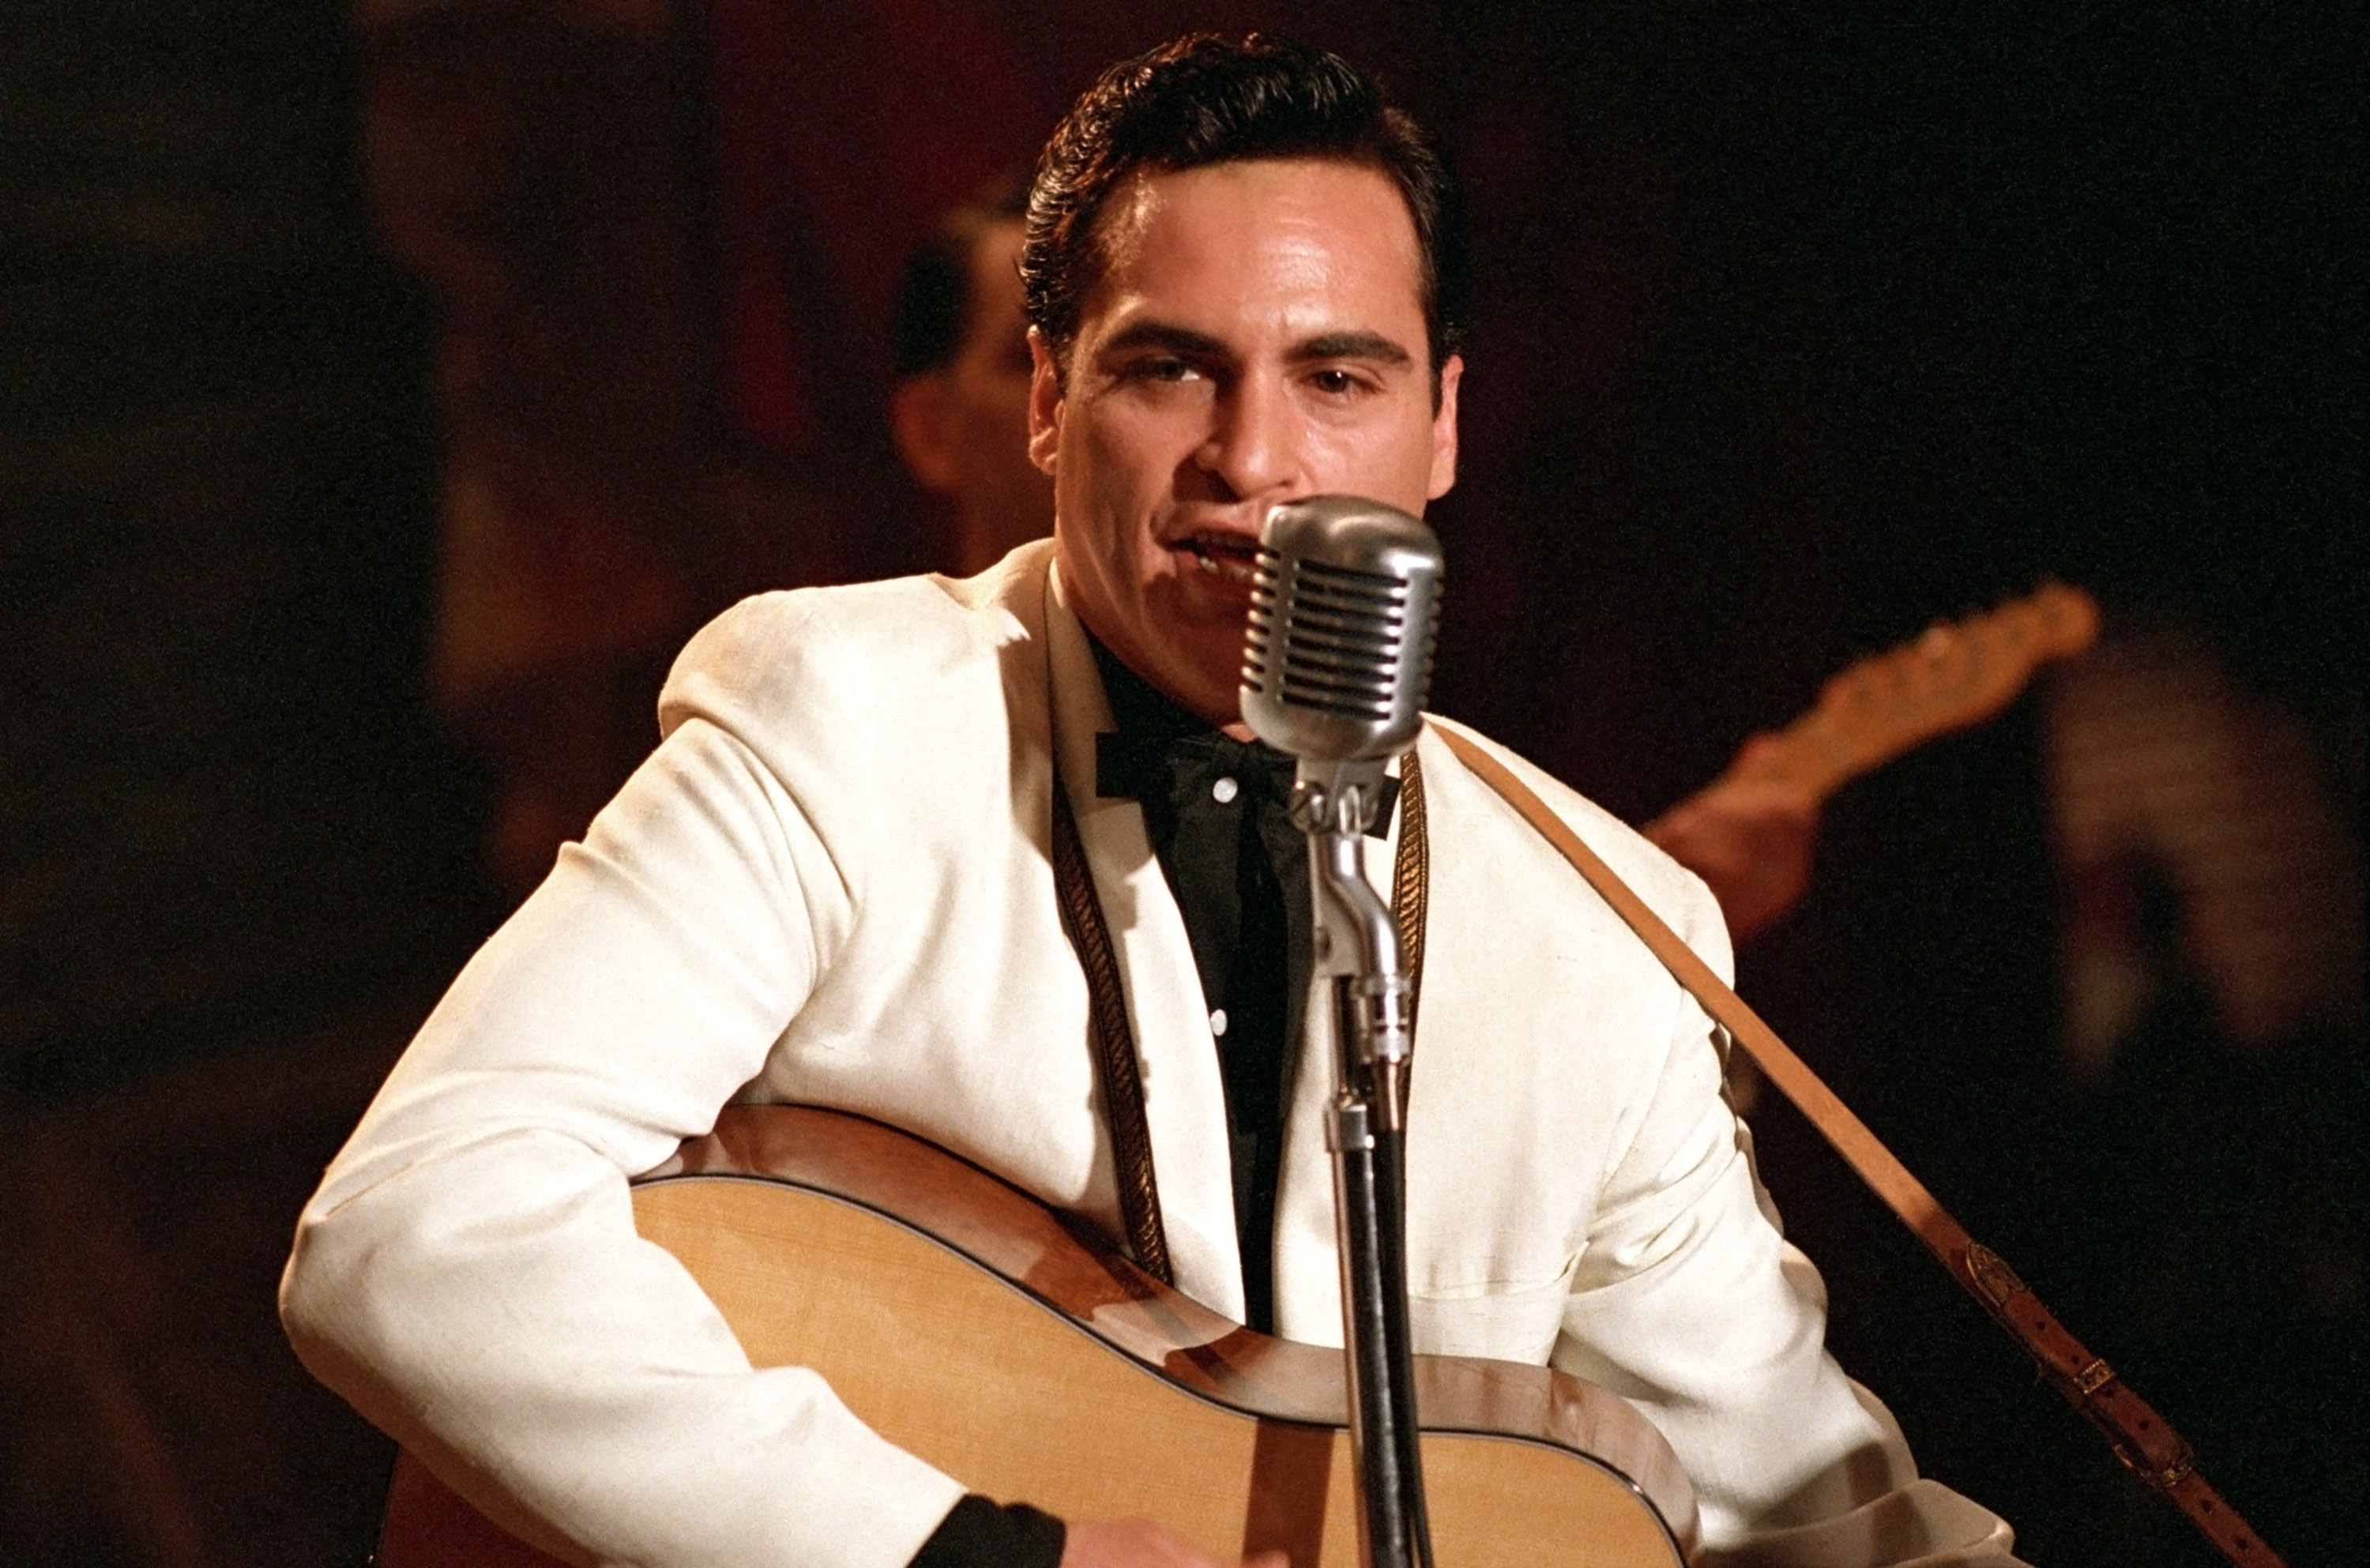 Joaquin Phoenix as Johnny Cash, playing the guitar and singing